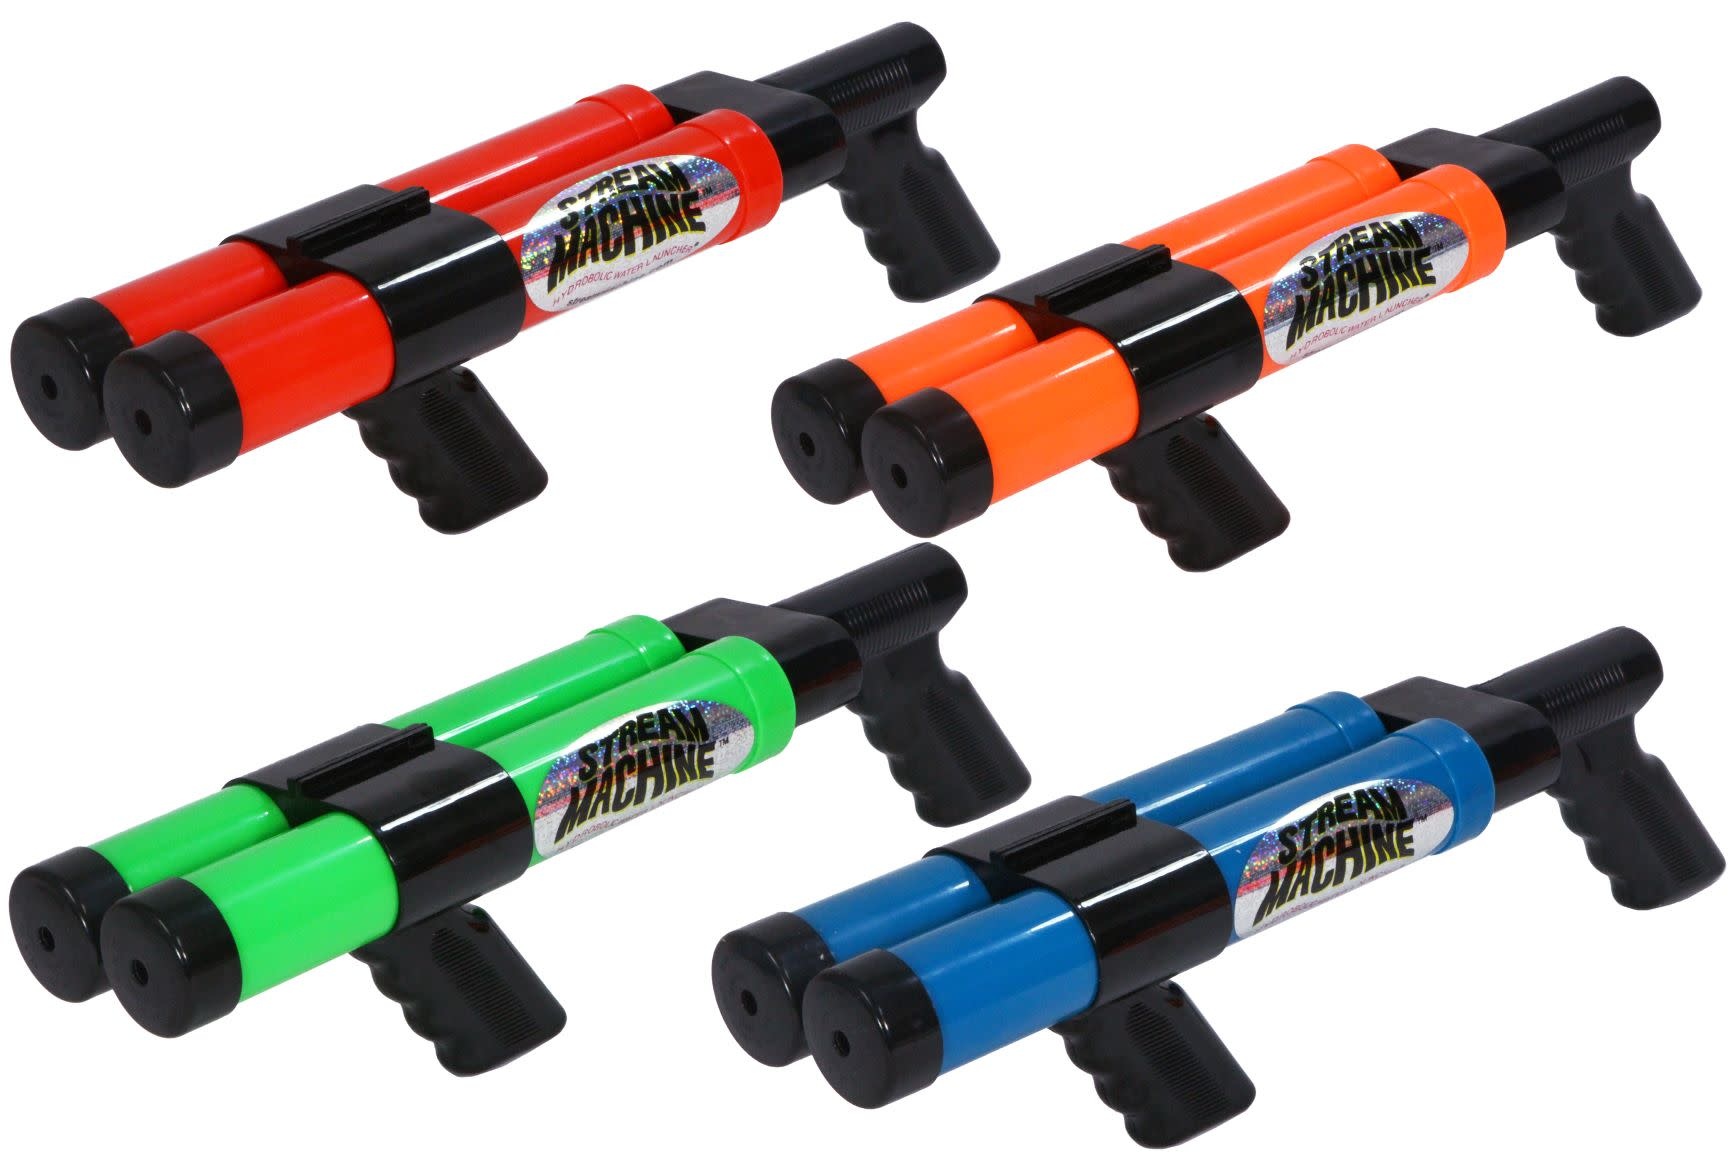 Stream Machine DB-1200 Double Barrel Water Blaster Assorted Colors